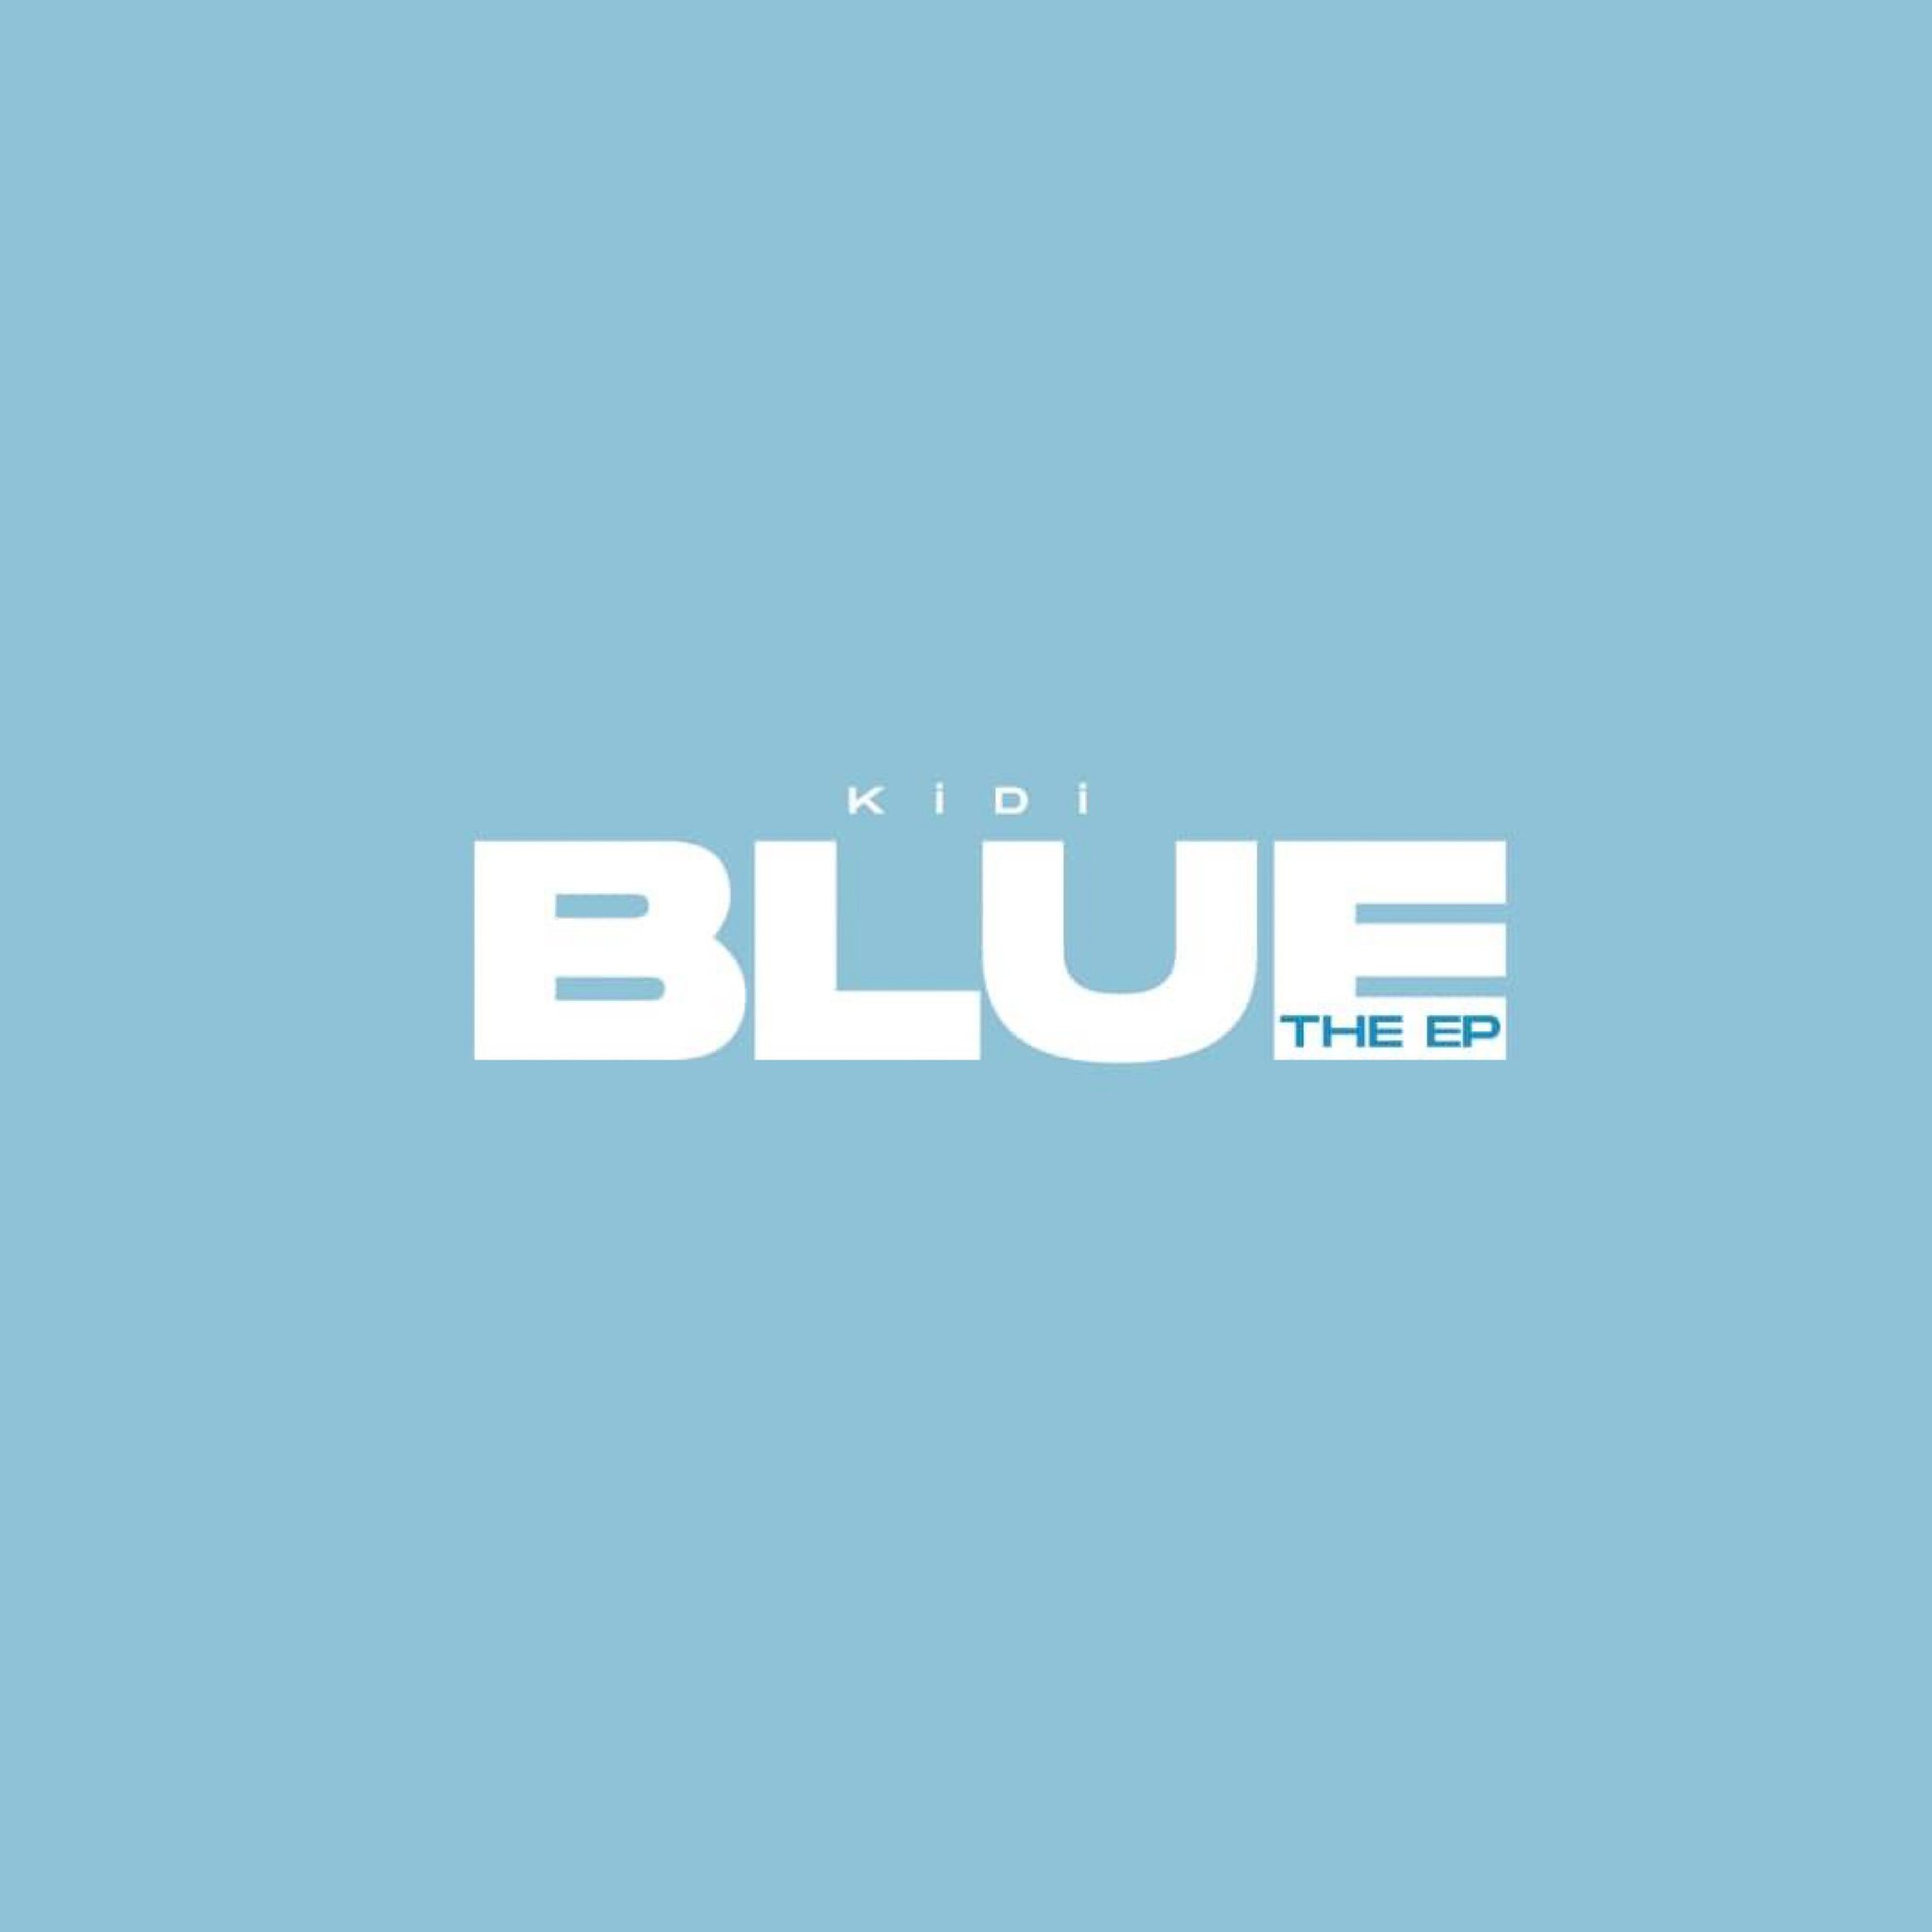 The Blue by KiDi | Album